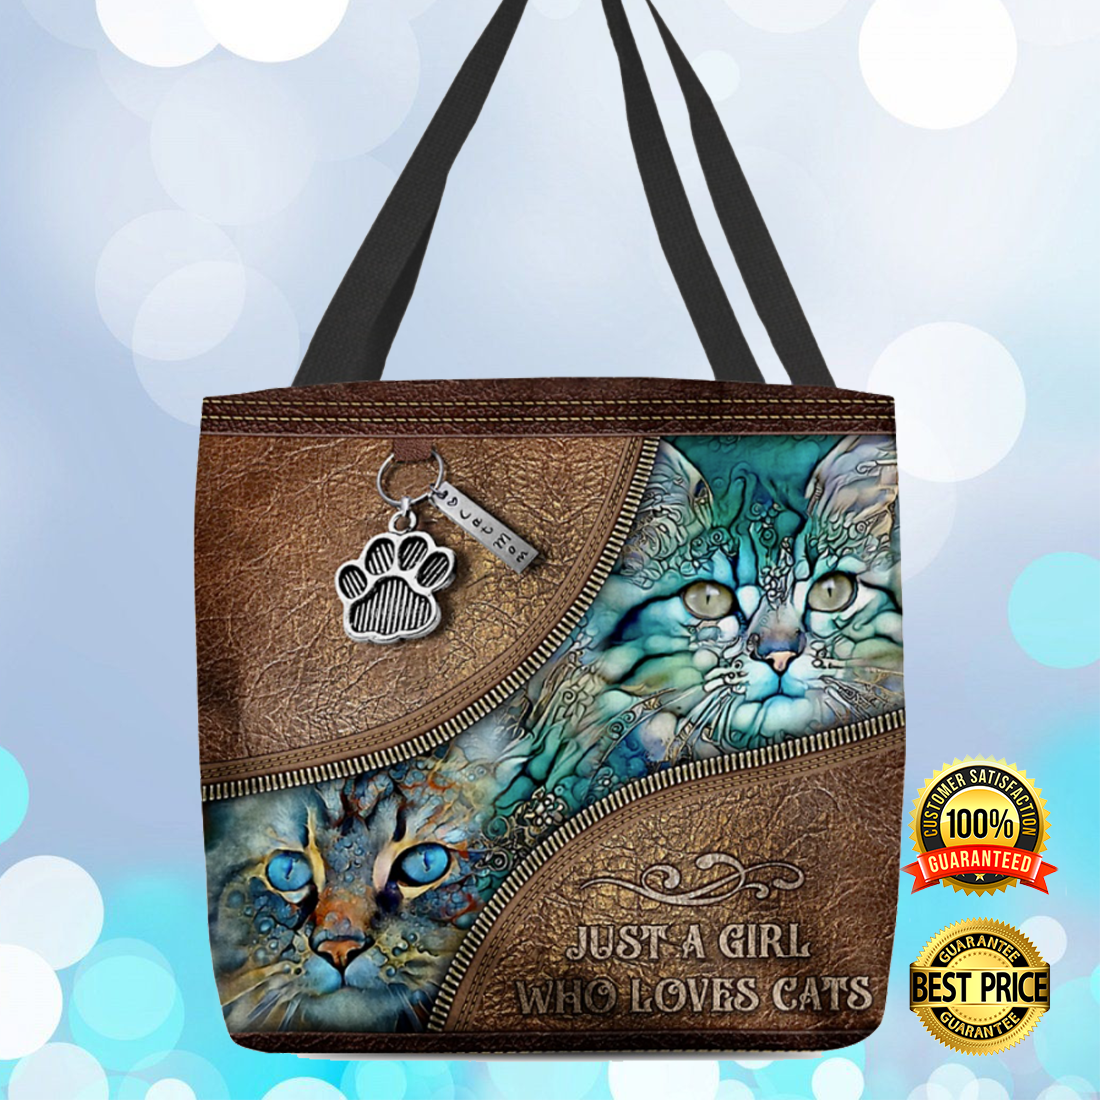 Just a girl who loves cats tote bag 4